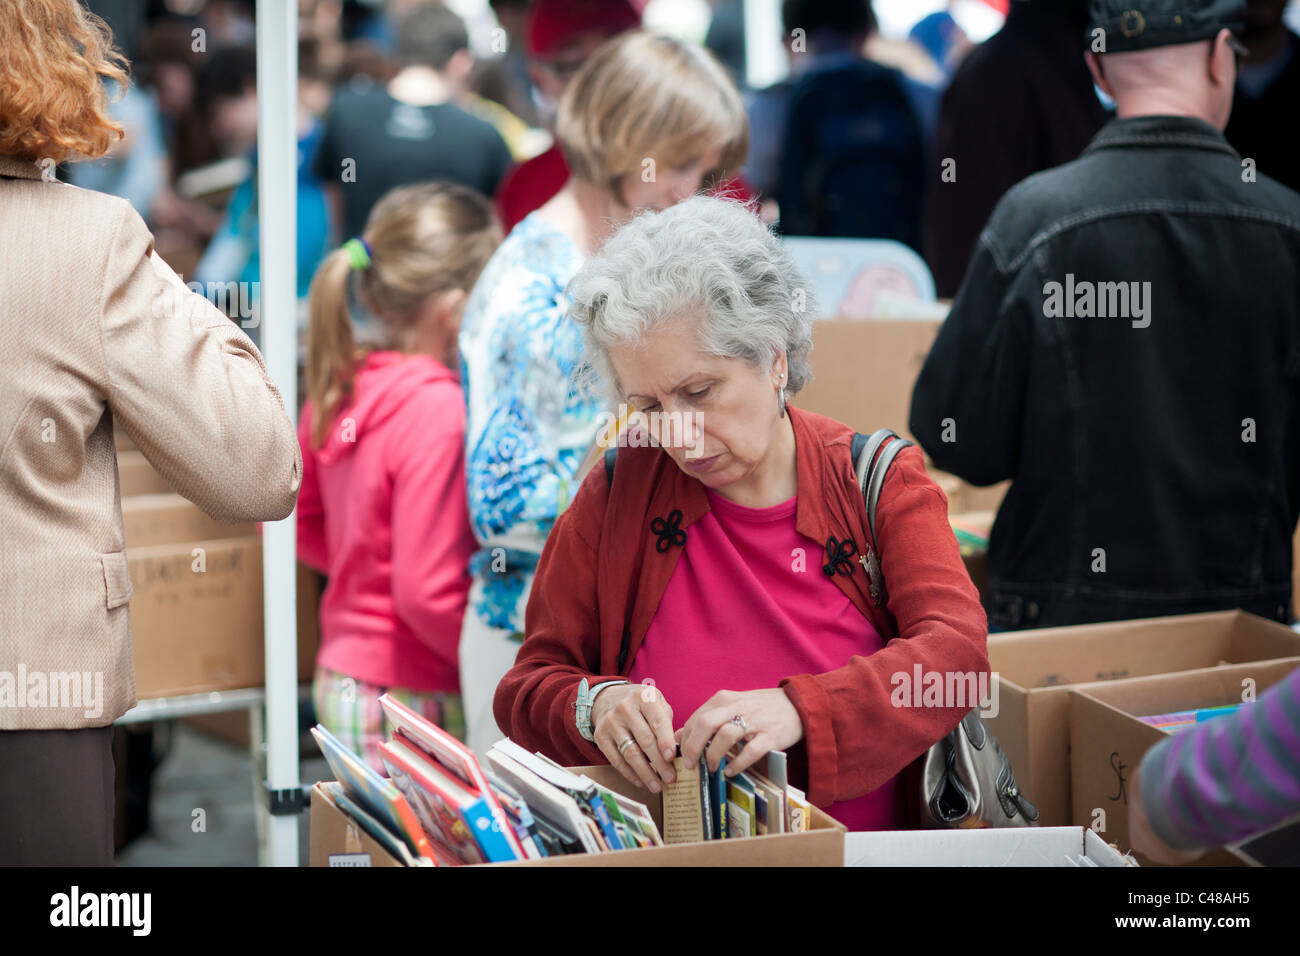 Shoppers search for bargains amidst the chaos of the Housing Works street fair in the New York neighborhood of Soho Stock Photo